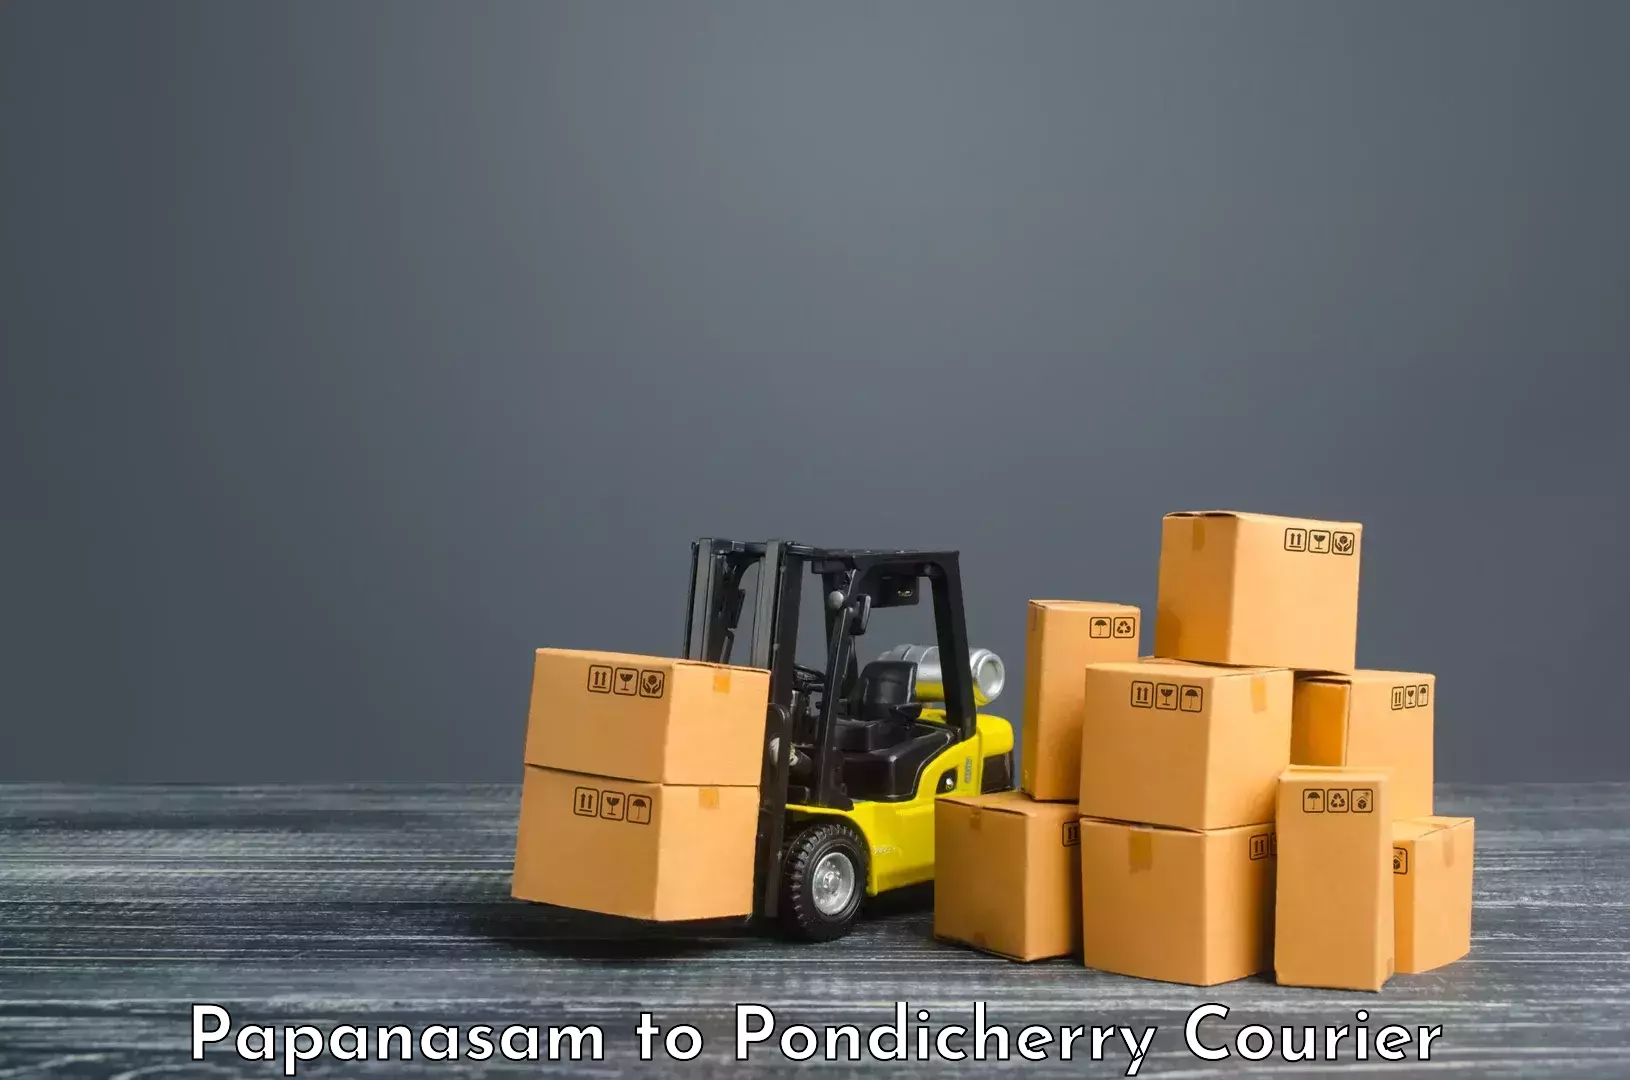 Enhanced shipping experience in Papanasam to Pondicherry